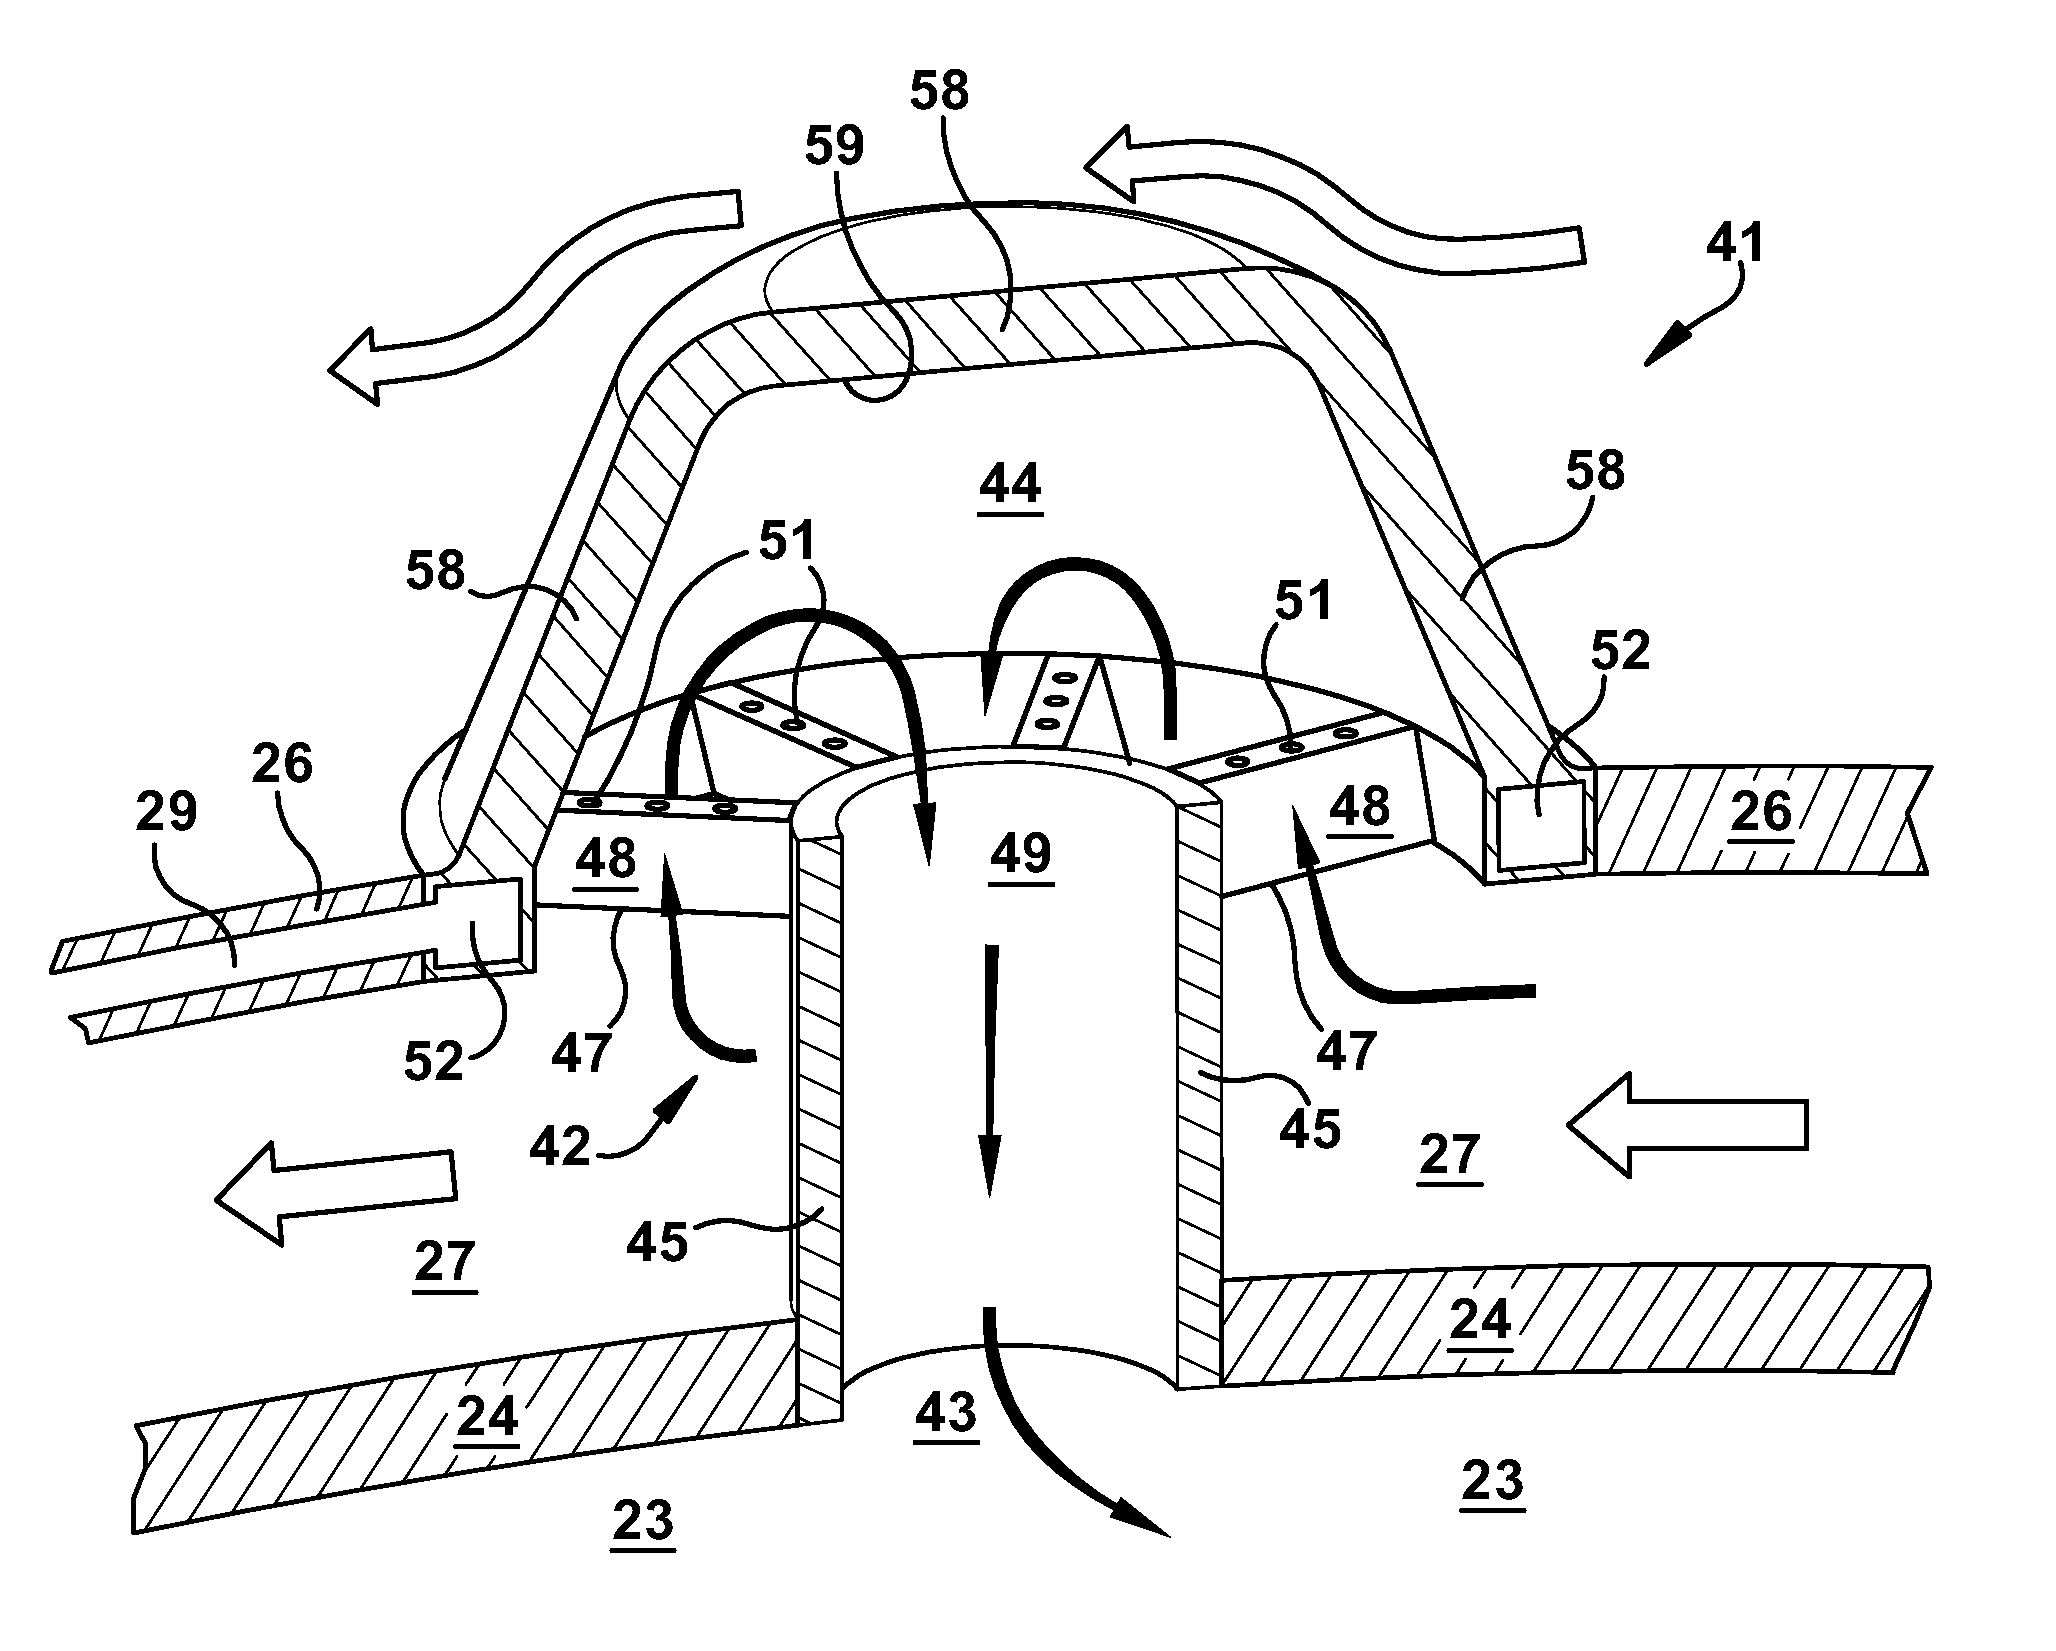 Fuel injection assemblies in combustion turbine engines